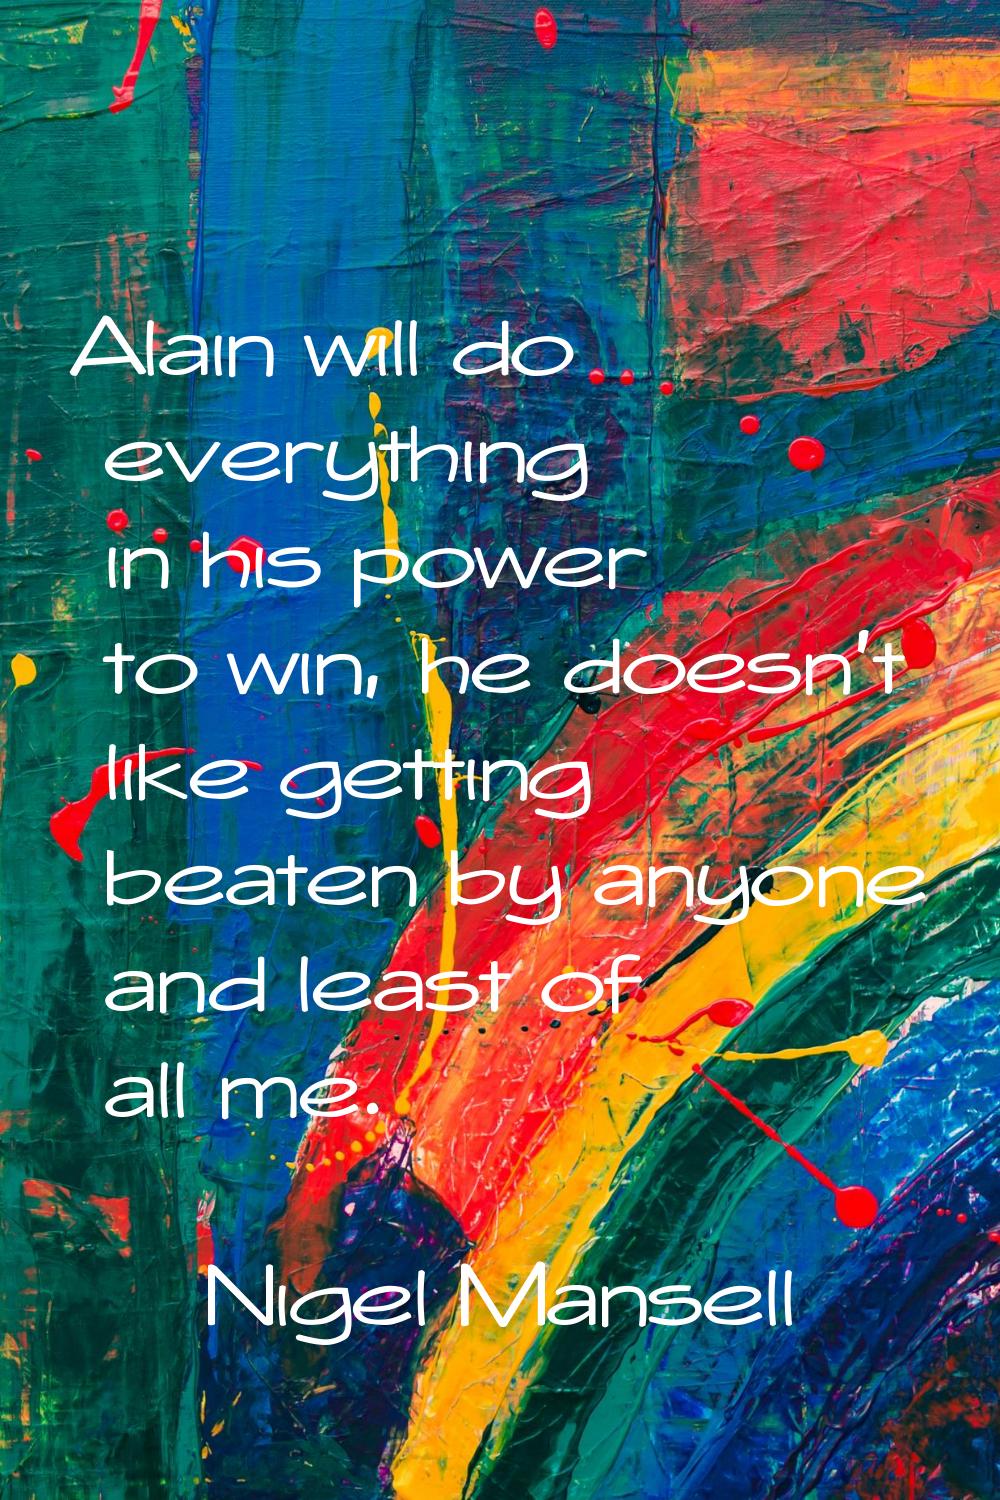 Alain will do everything in his power to win, he doesn't like getting beaten by anyone and least of